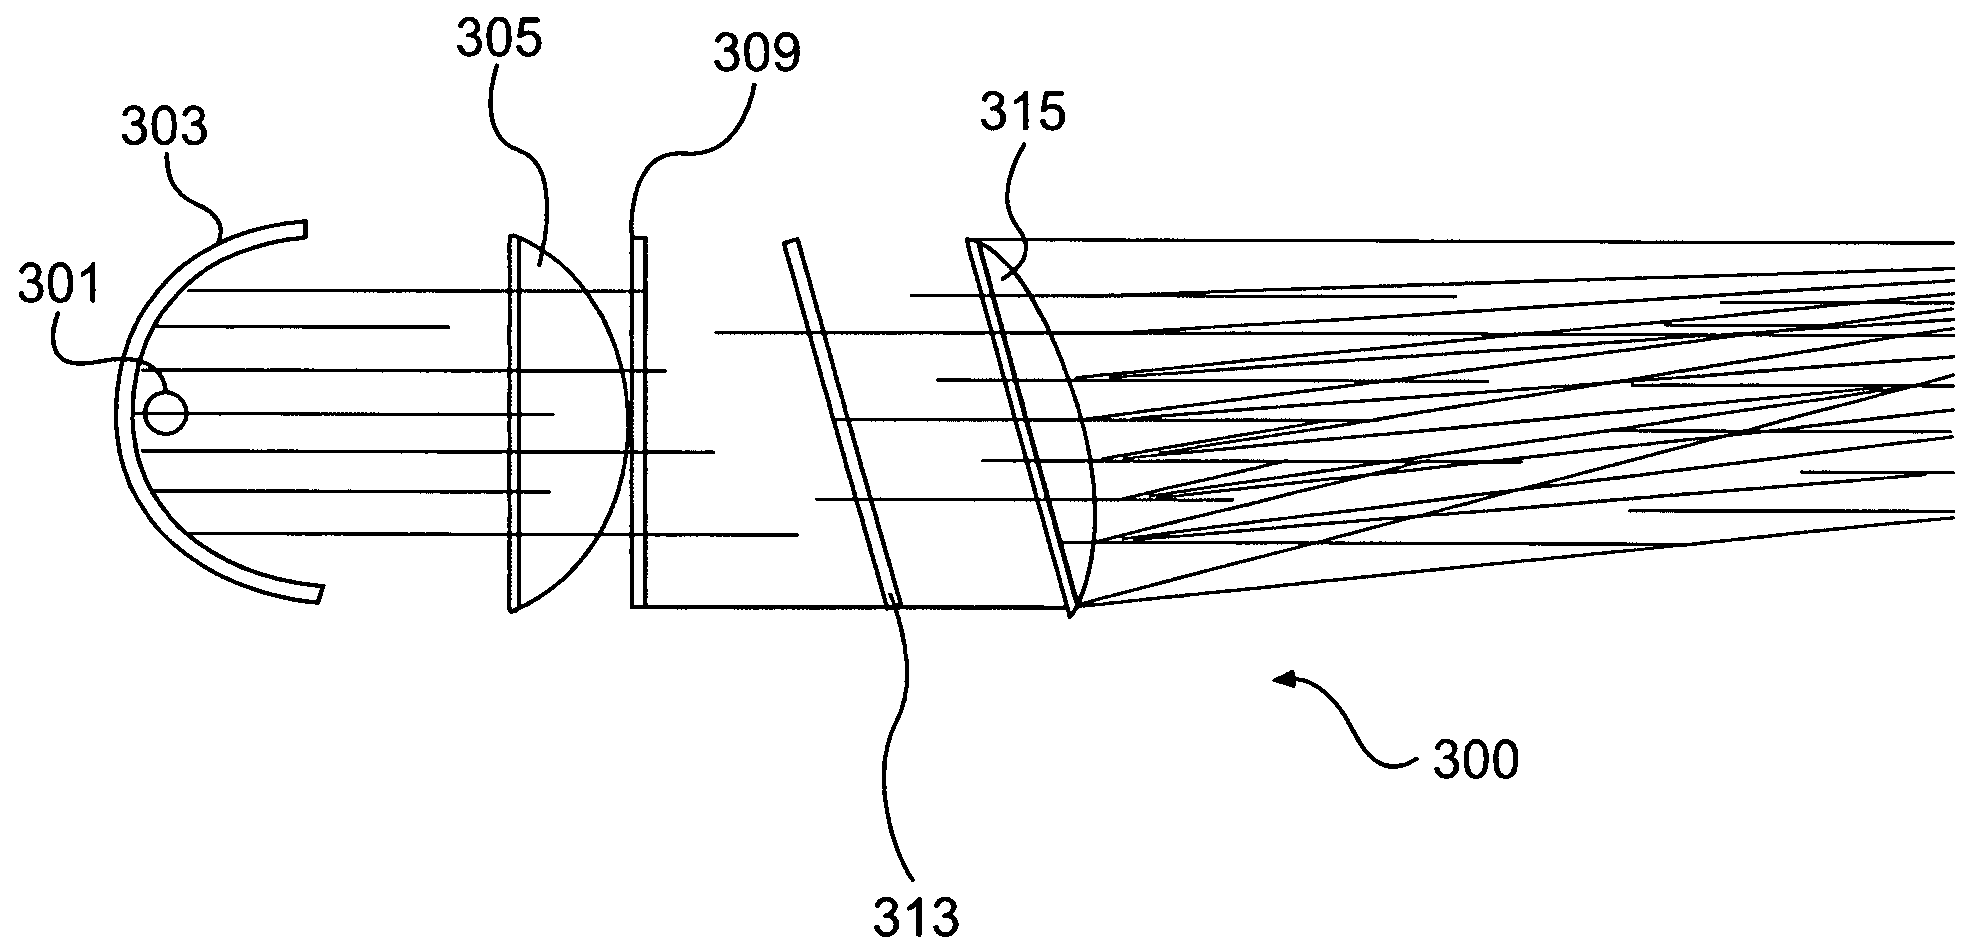 Image projector display device